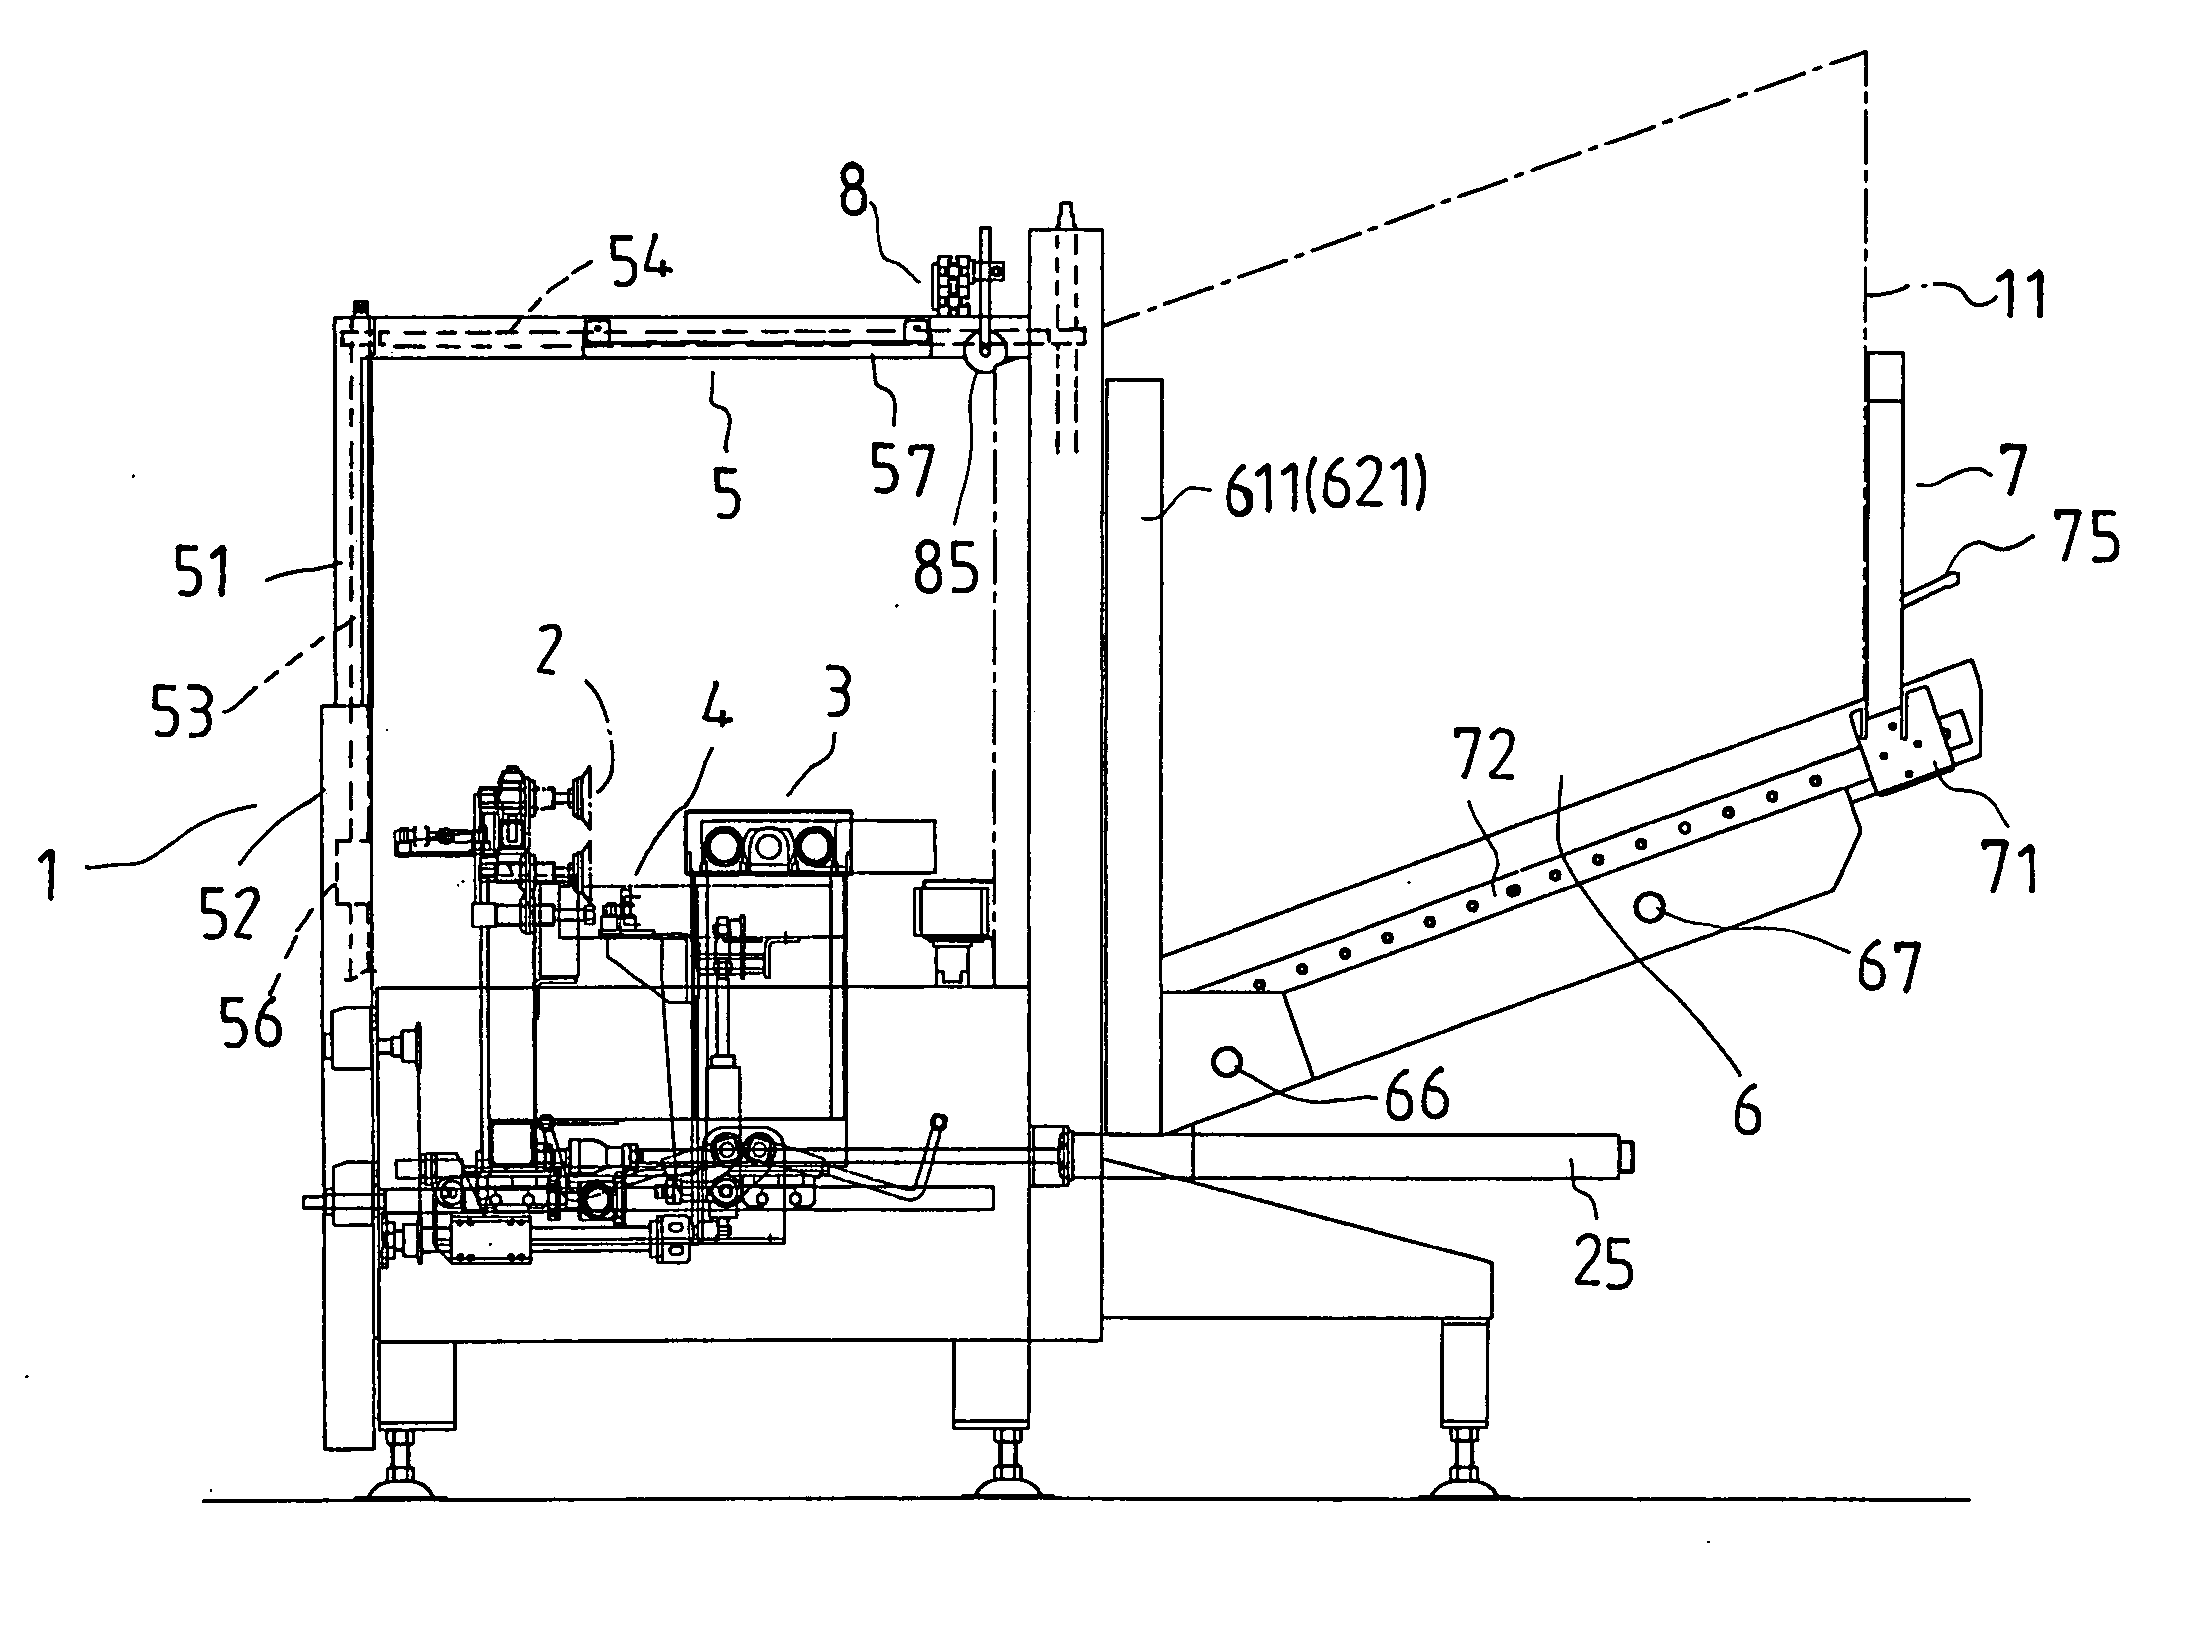 Machine for spreading out cardboard boxes automatically